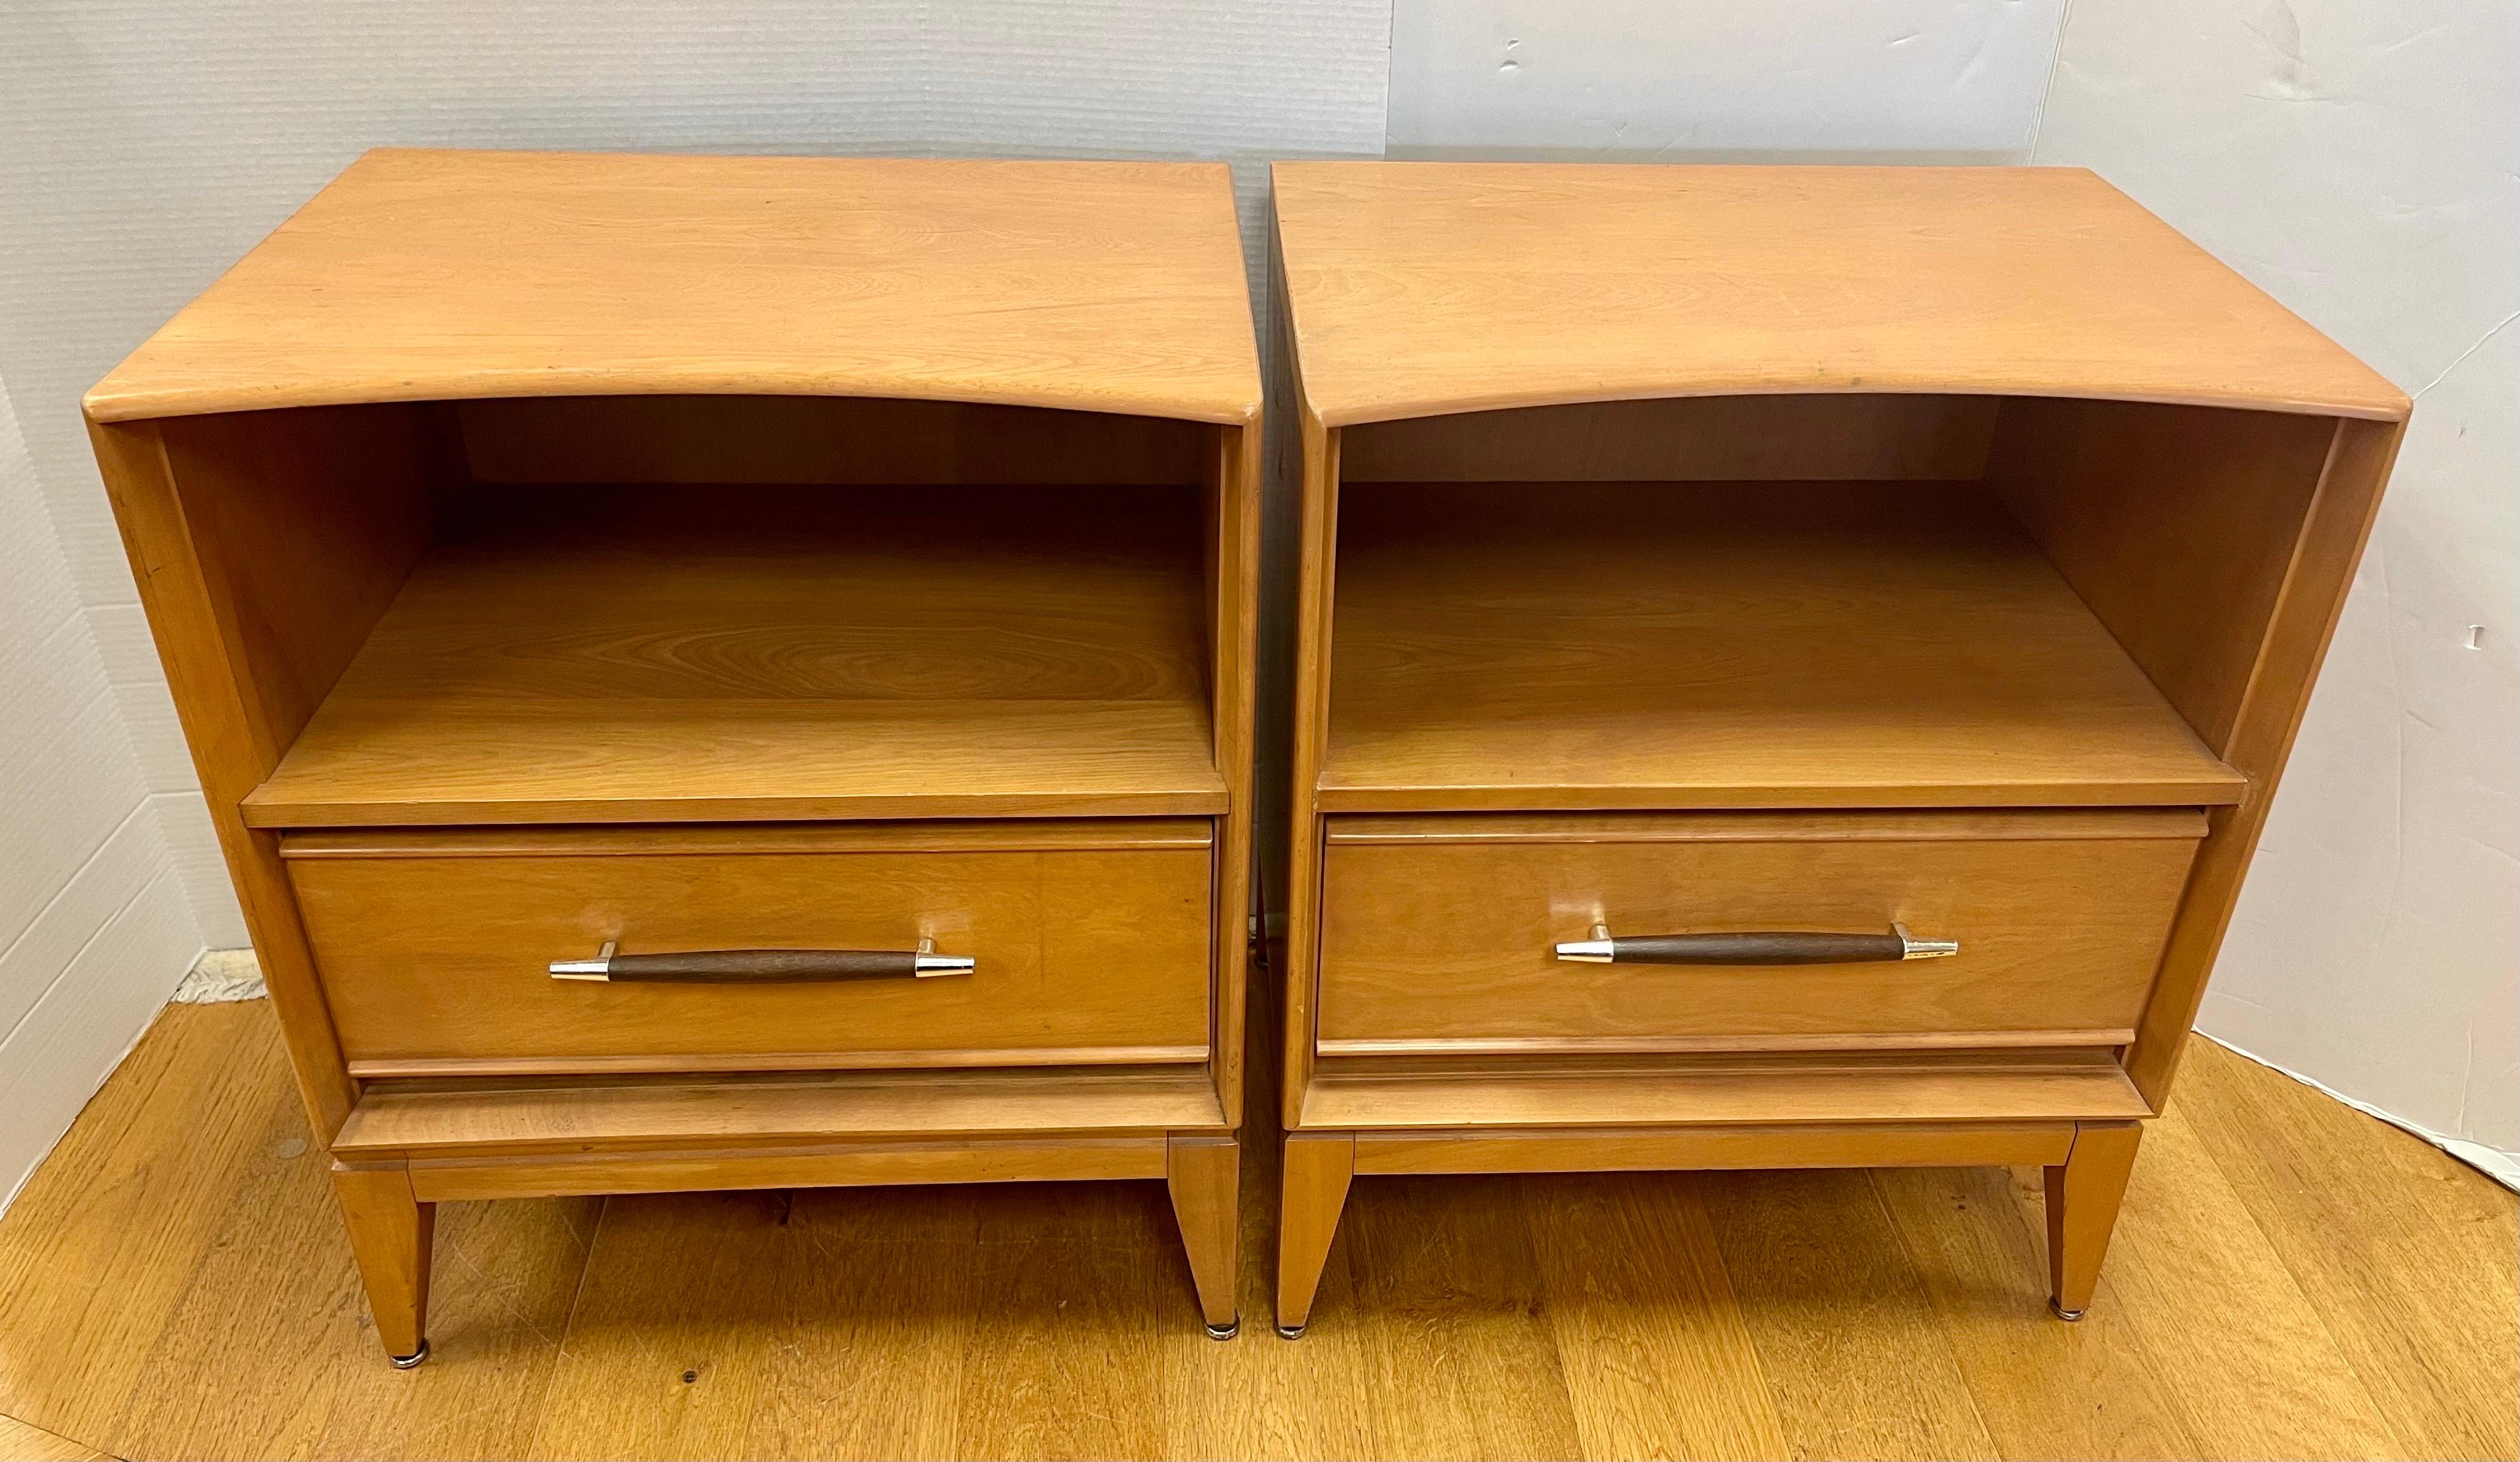 Pair of signed vintage Heywood Wakefield one drawer nighstands in champagne finish with sculptural walnut with brass drawer pulls. Date stamped 1955. Not your cookie cutter Heywood Wakefield. 
See our other listings for tall chest and triple dresser.